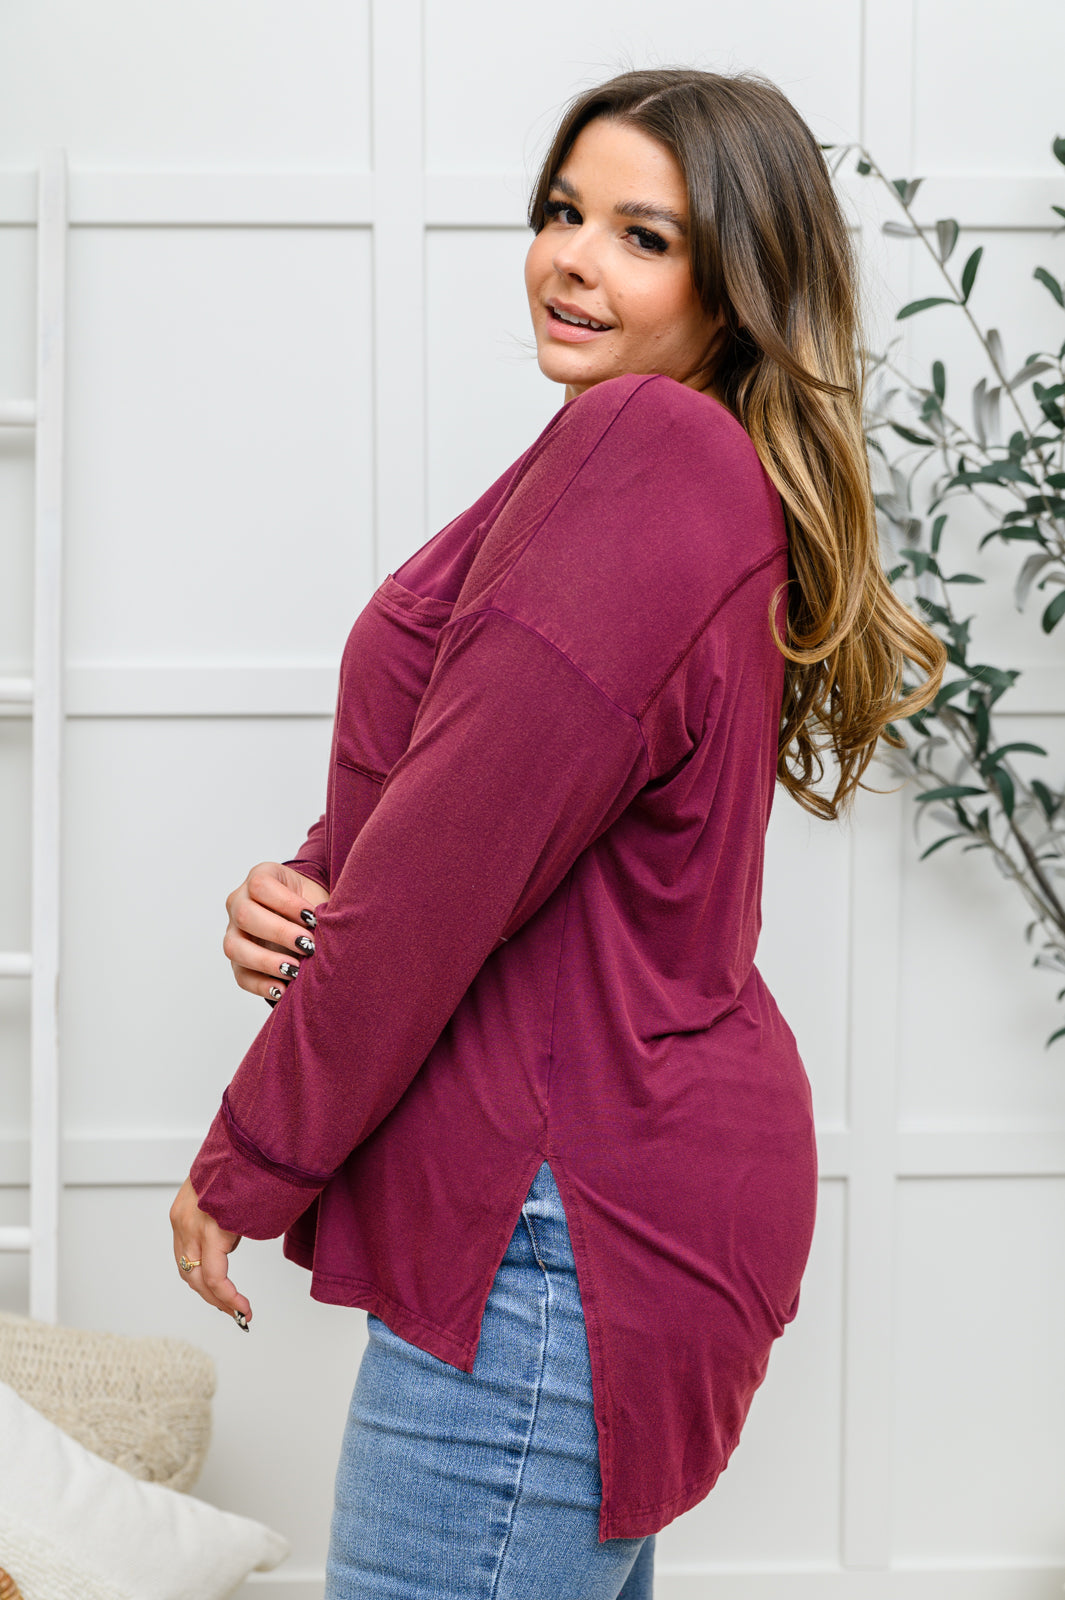 Womens - Long Sleeve Knit Top With Pocket In Burgundy